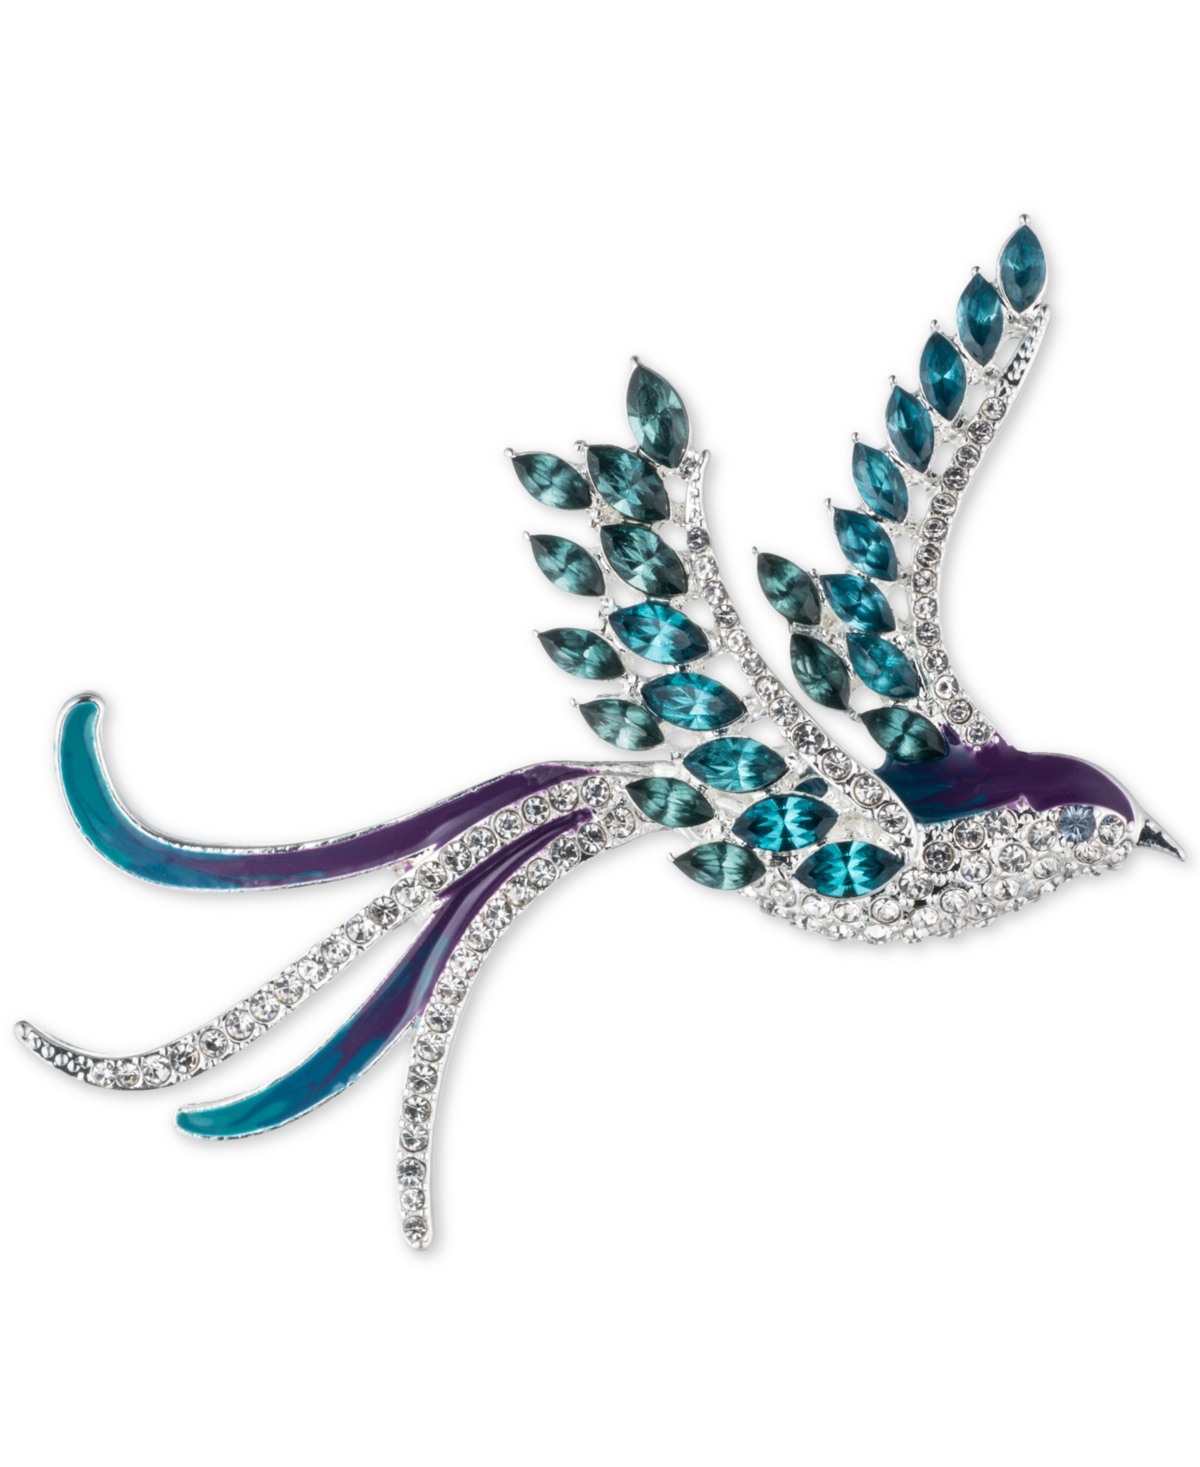 Gold-Tone Crystal Bird Pin, Created for Macy's - Blue